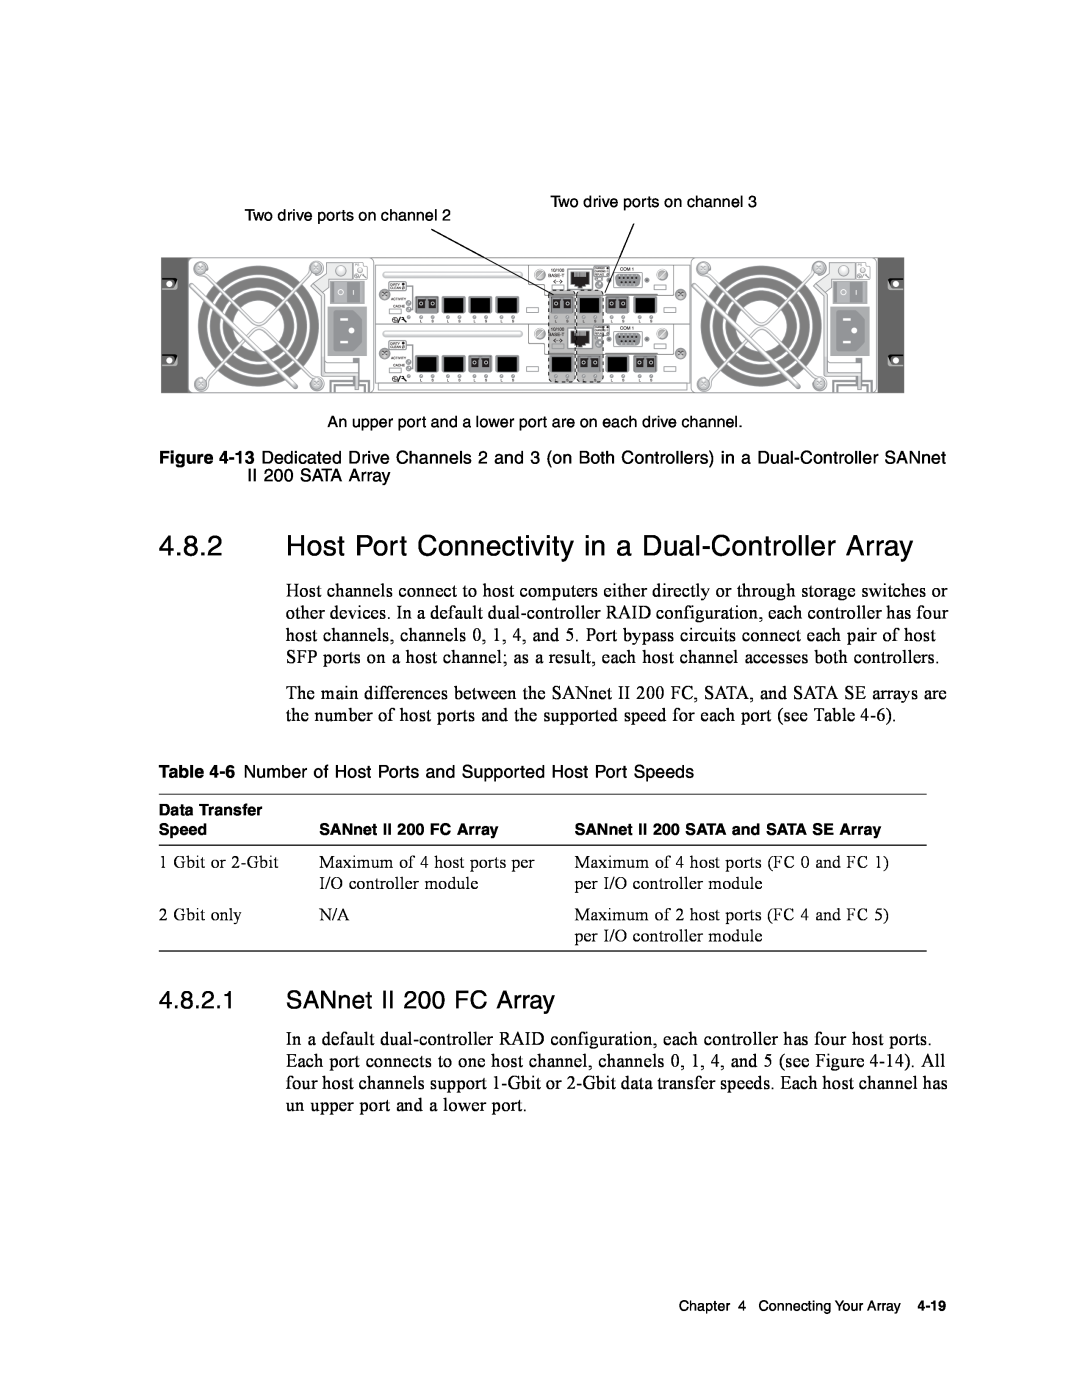 Dot Hill Systems service manual Host Port Connectivity in a Dual-Controller Array, SANnet II 200 FC Array 